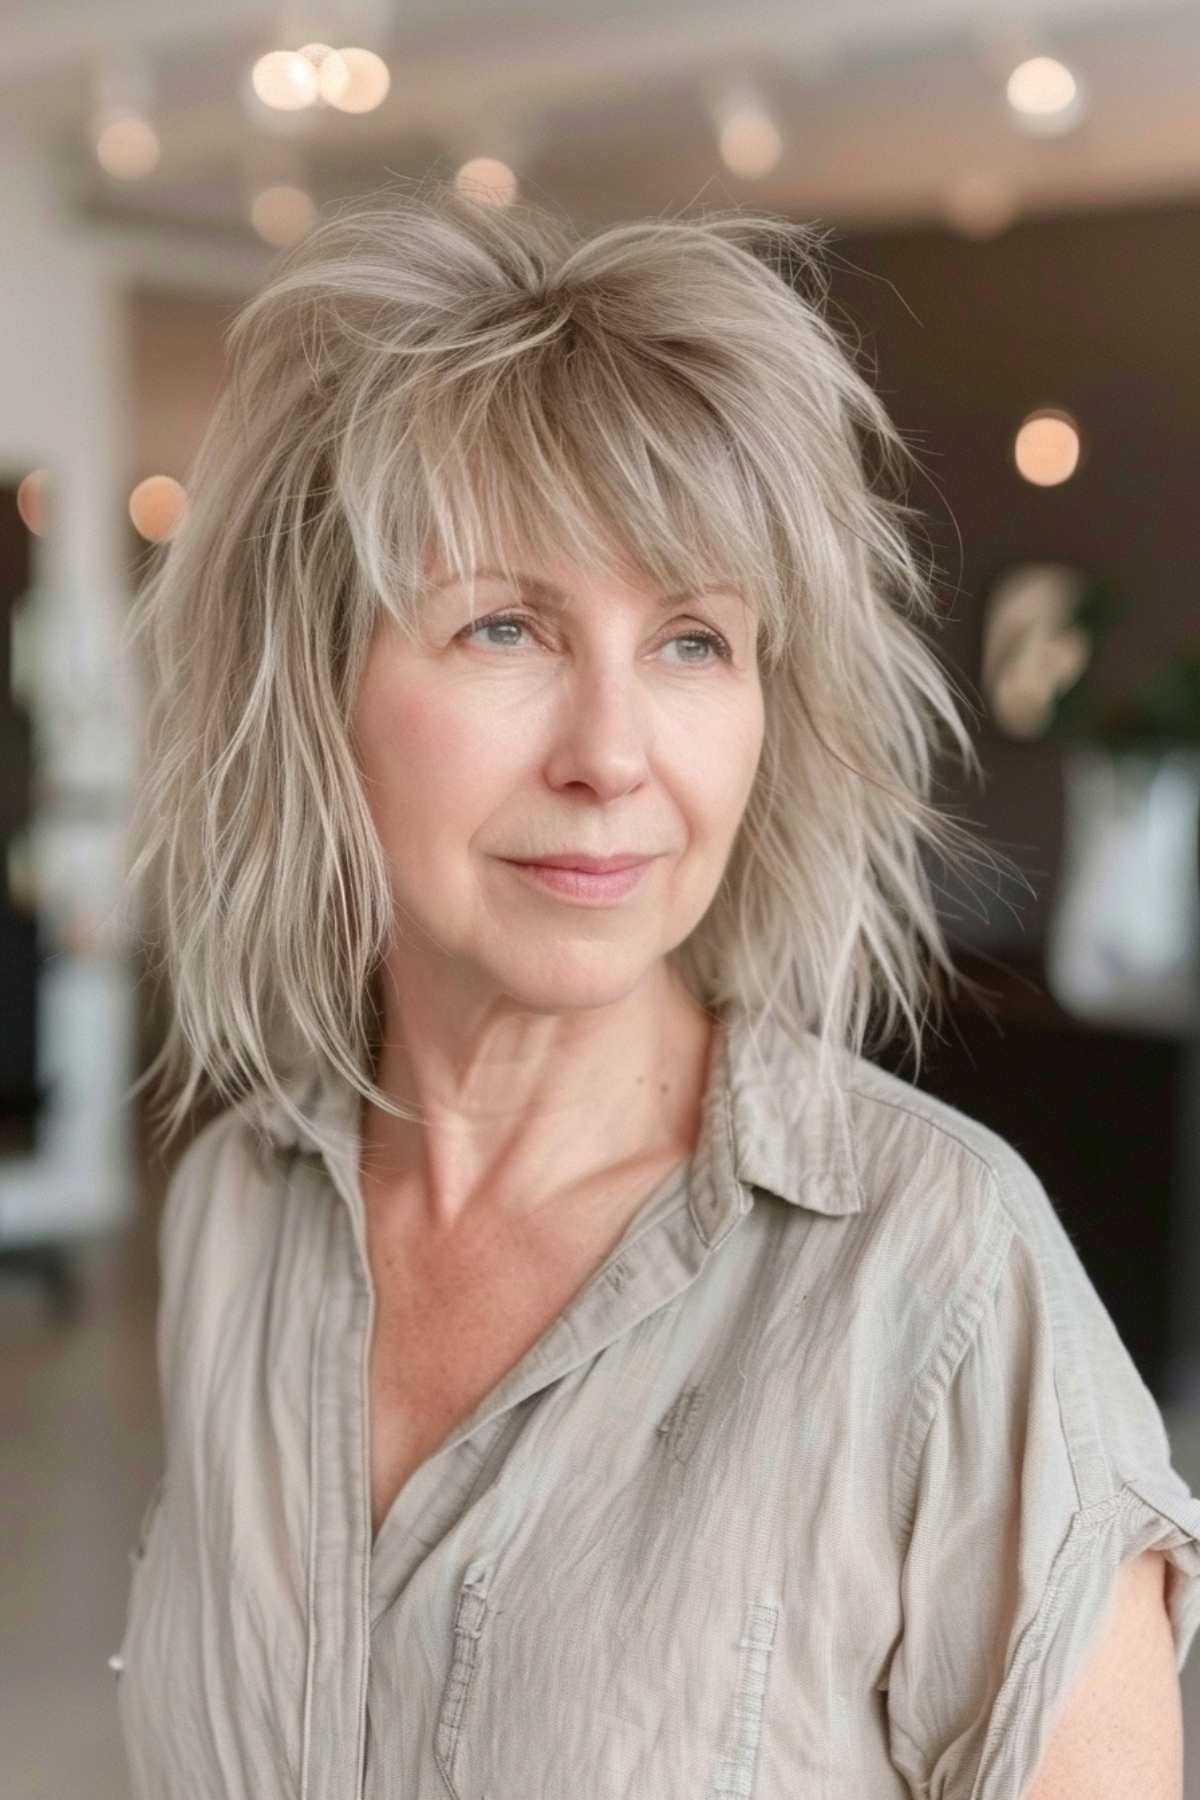 Modern shaggy layered haircut with ash blonde highlights on an older woman, featuring a light feathered fringe and natural tousled look.